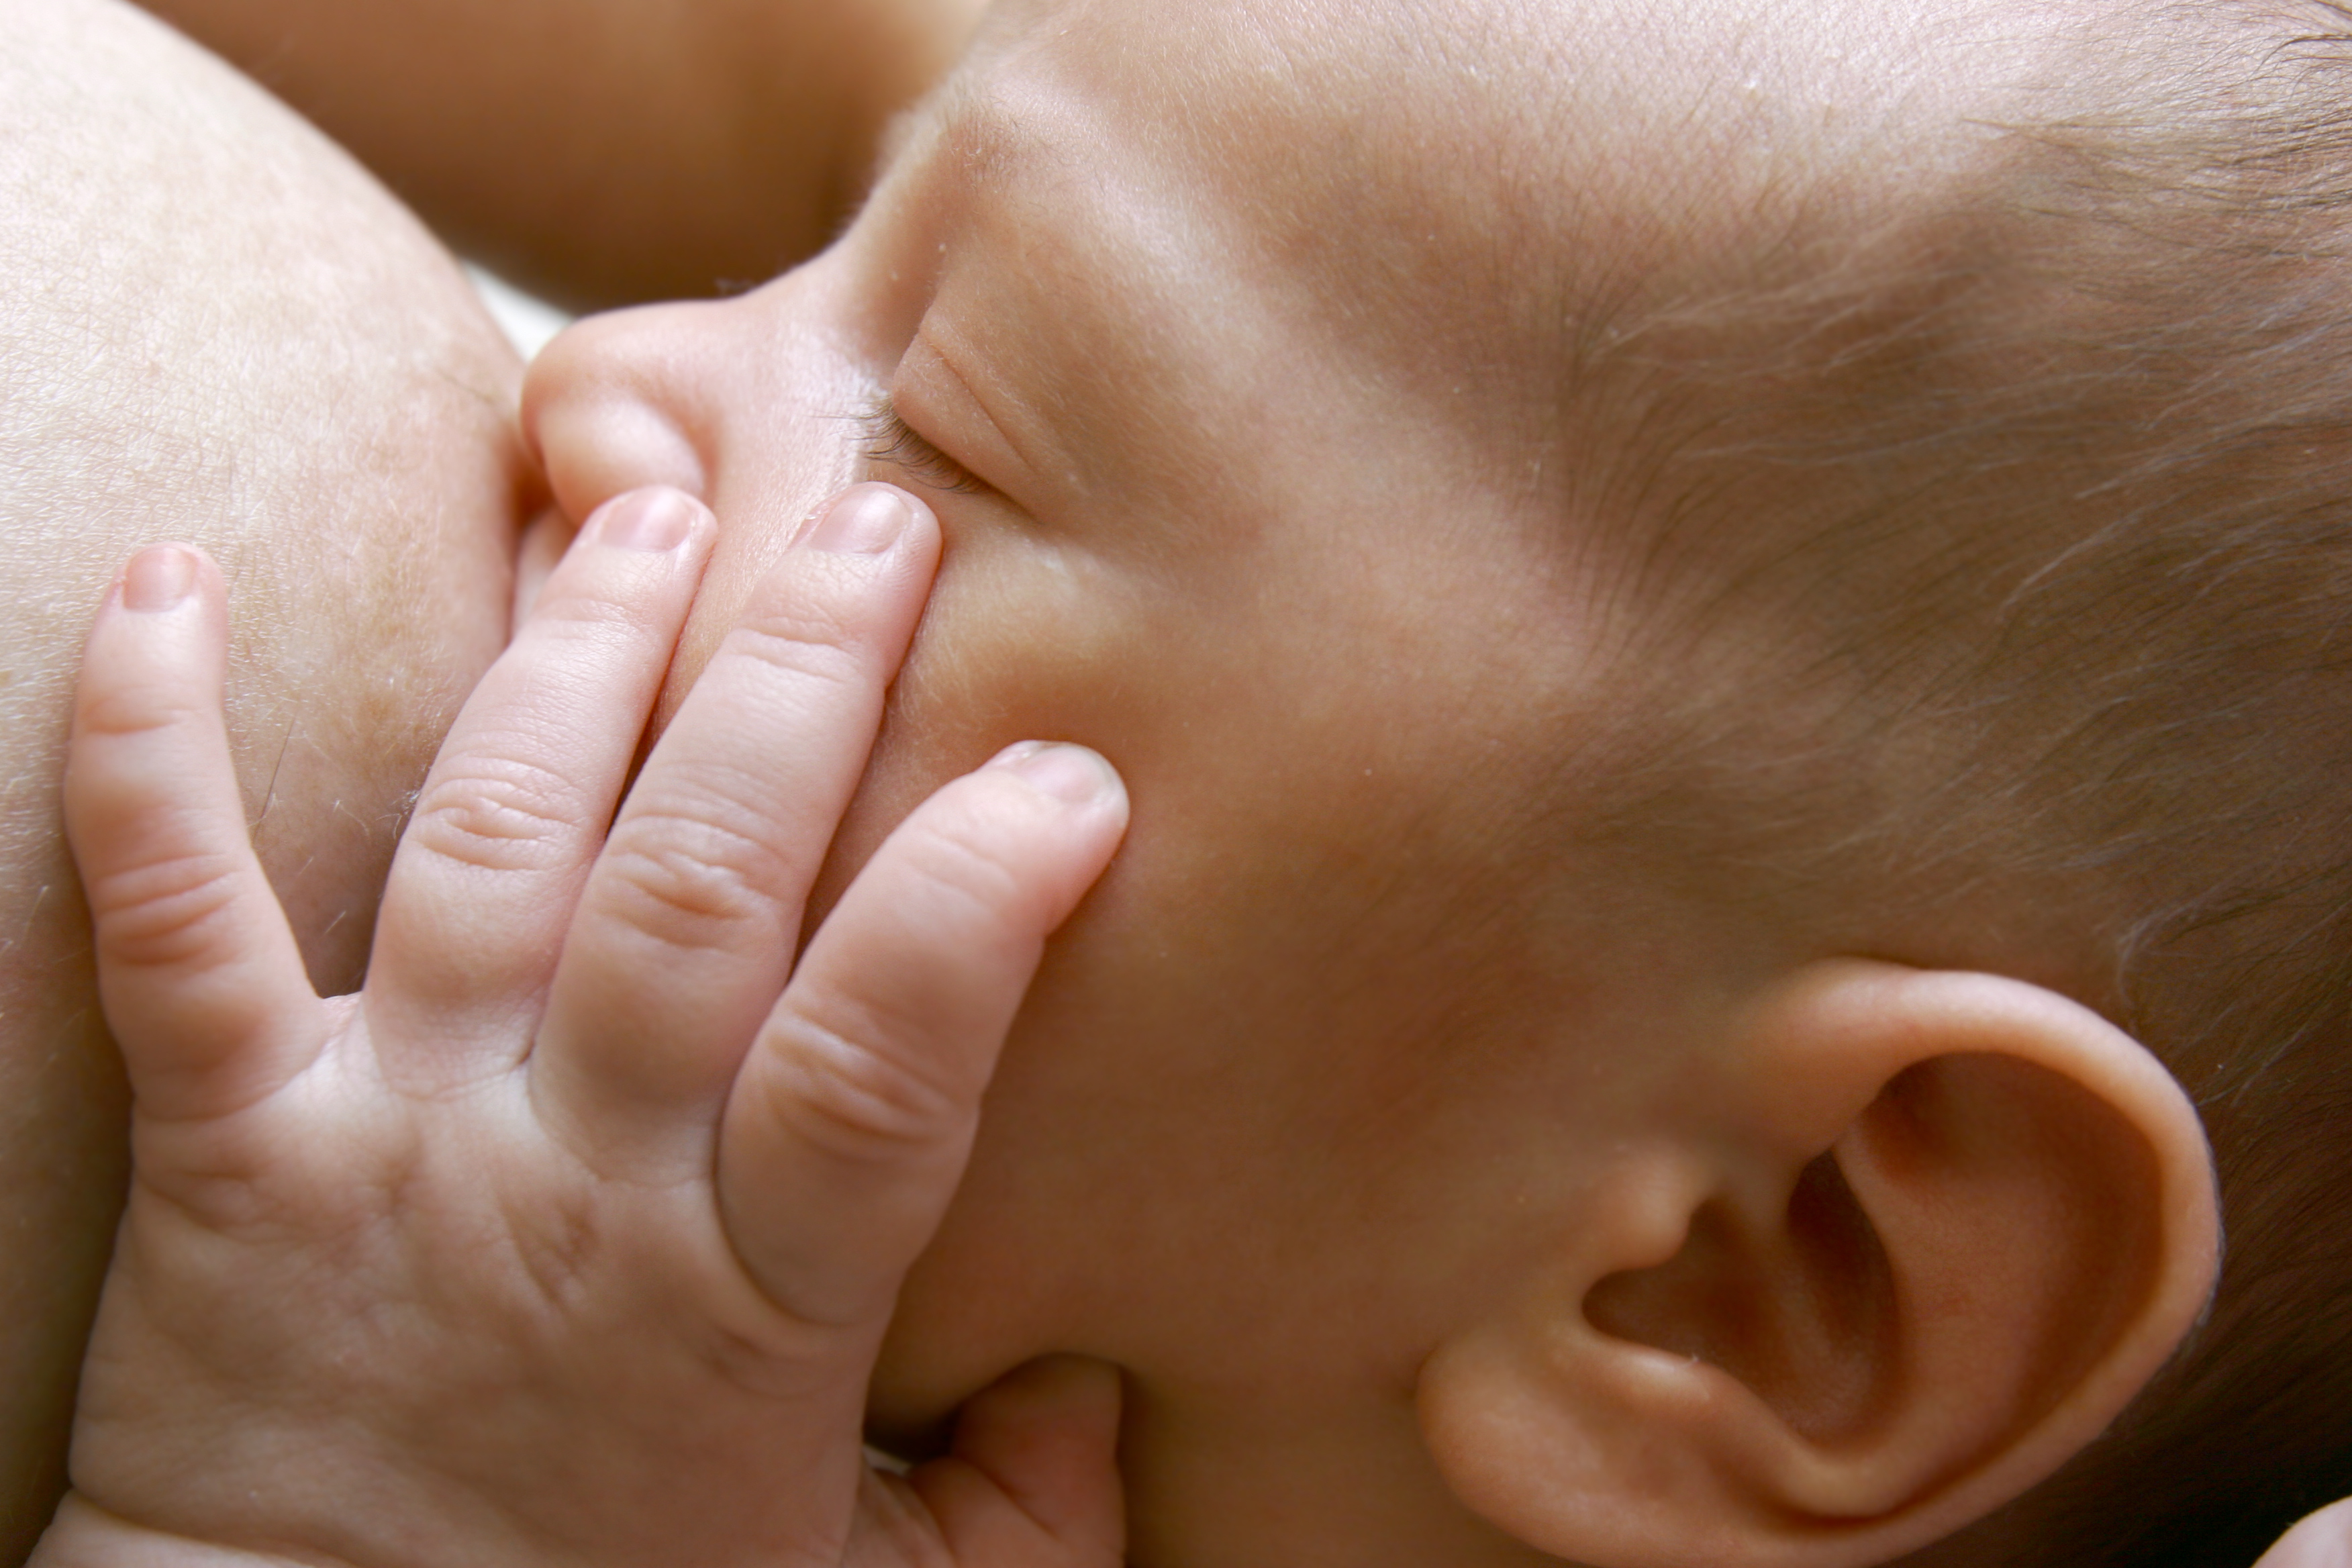 Breastfeeding – Hacks That Help and Myths That Don’t